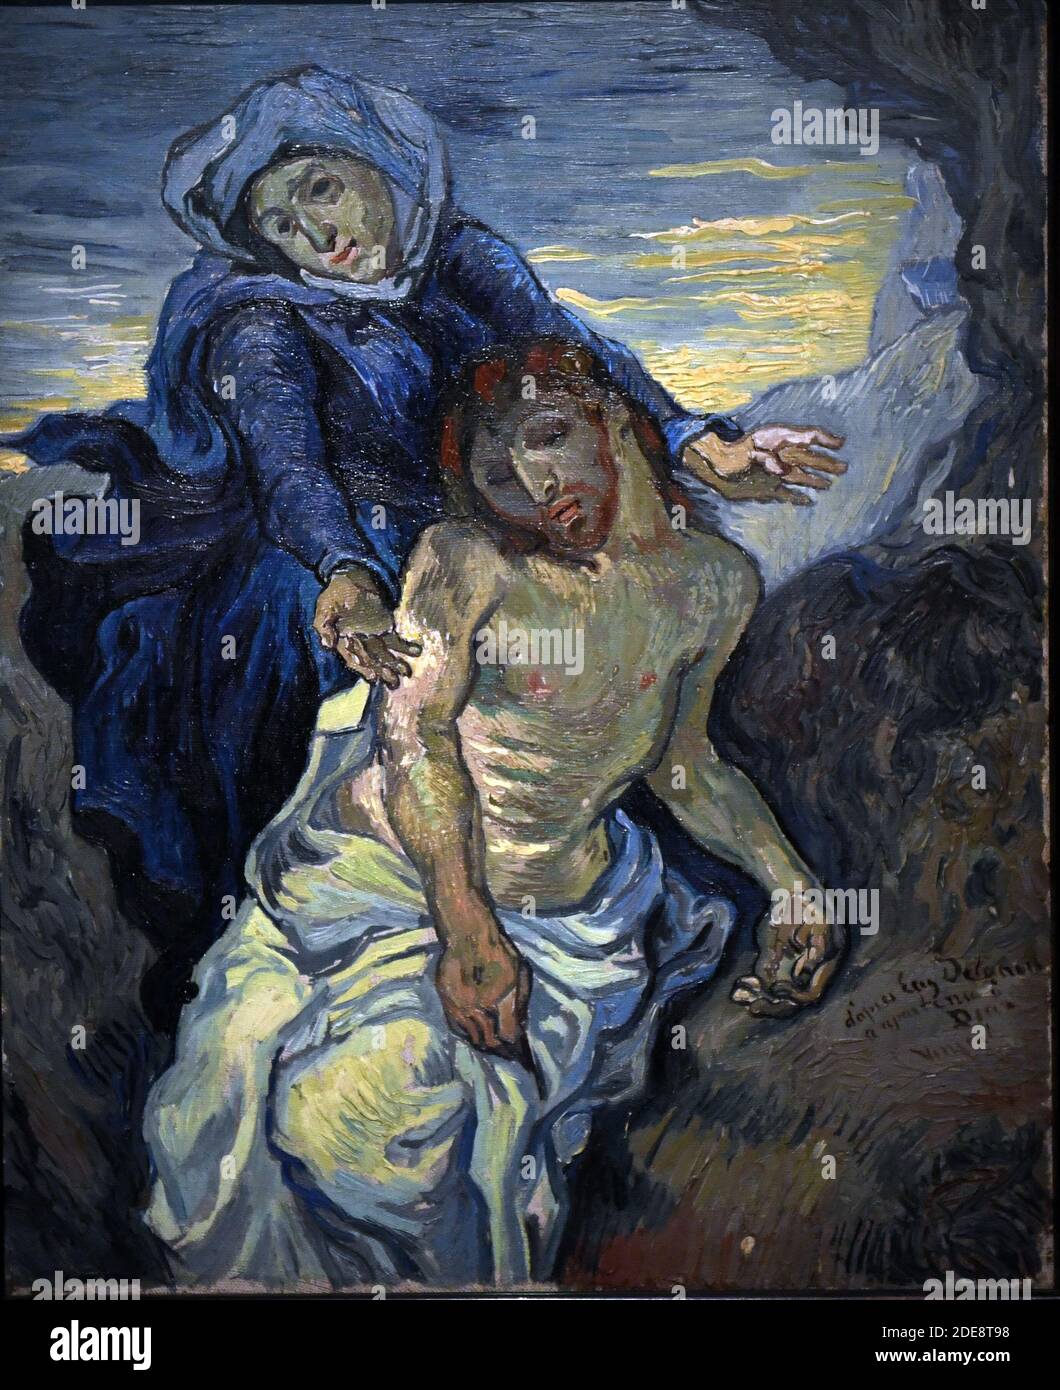 Pieta by Vincent van Gogh, (1853-1890)c. 1890 Painting Oil on canvas, 41.5  x 34 cm Donated by the diocese of New York, 1973 Vincent van Gogh painted  this small Pietà just a